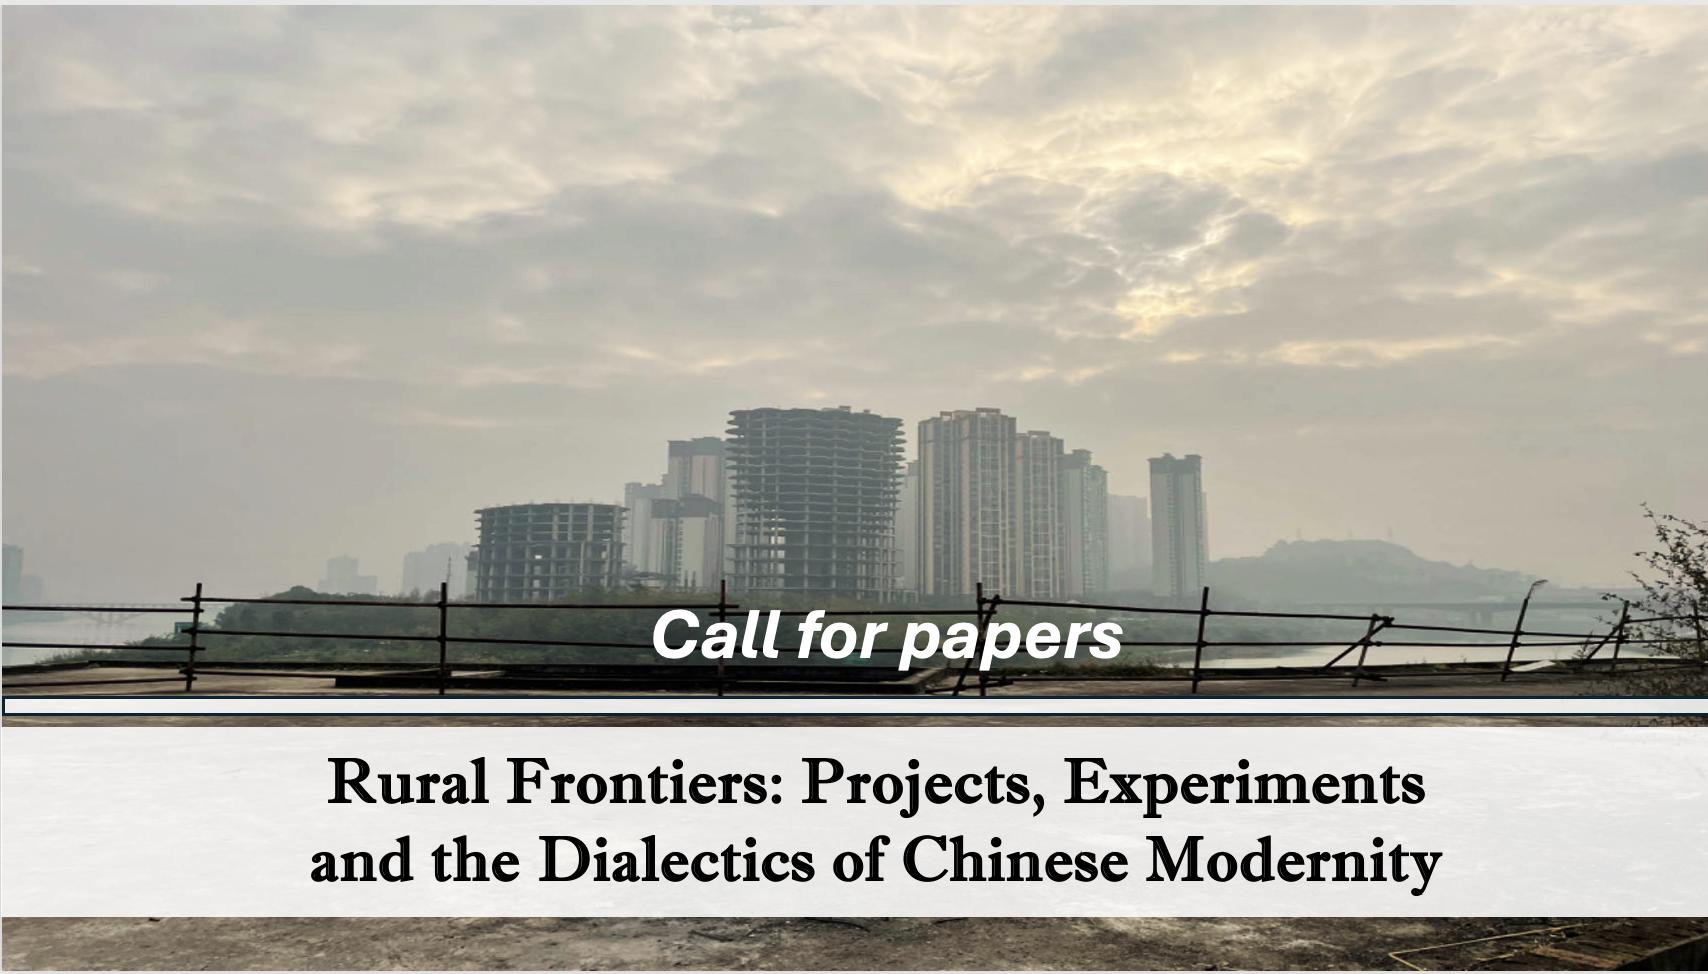 Call For Papers! Special Issue/Edited Volume “Rural Frontiers: Projects, Experiments, and the Dialectics of Chinese Modernity”